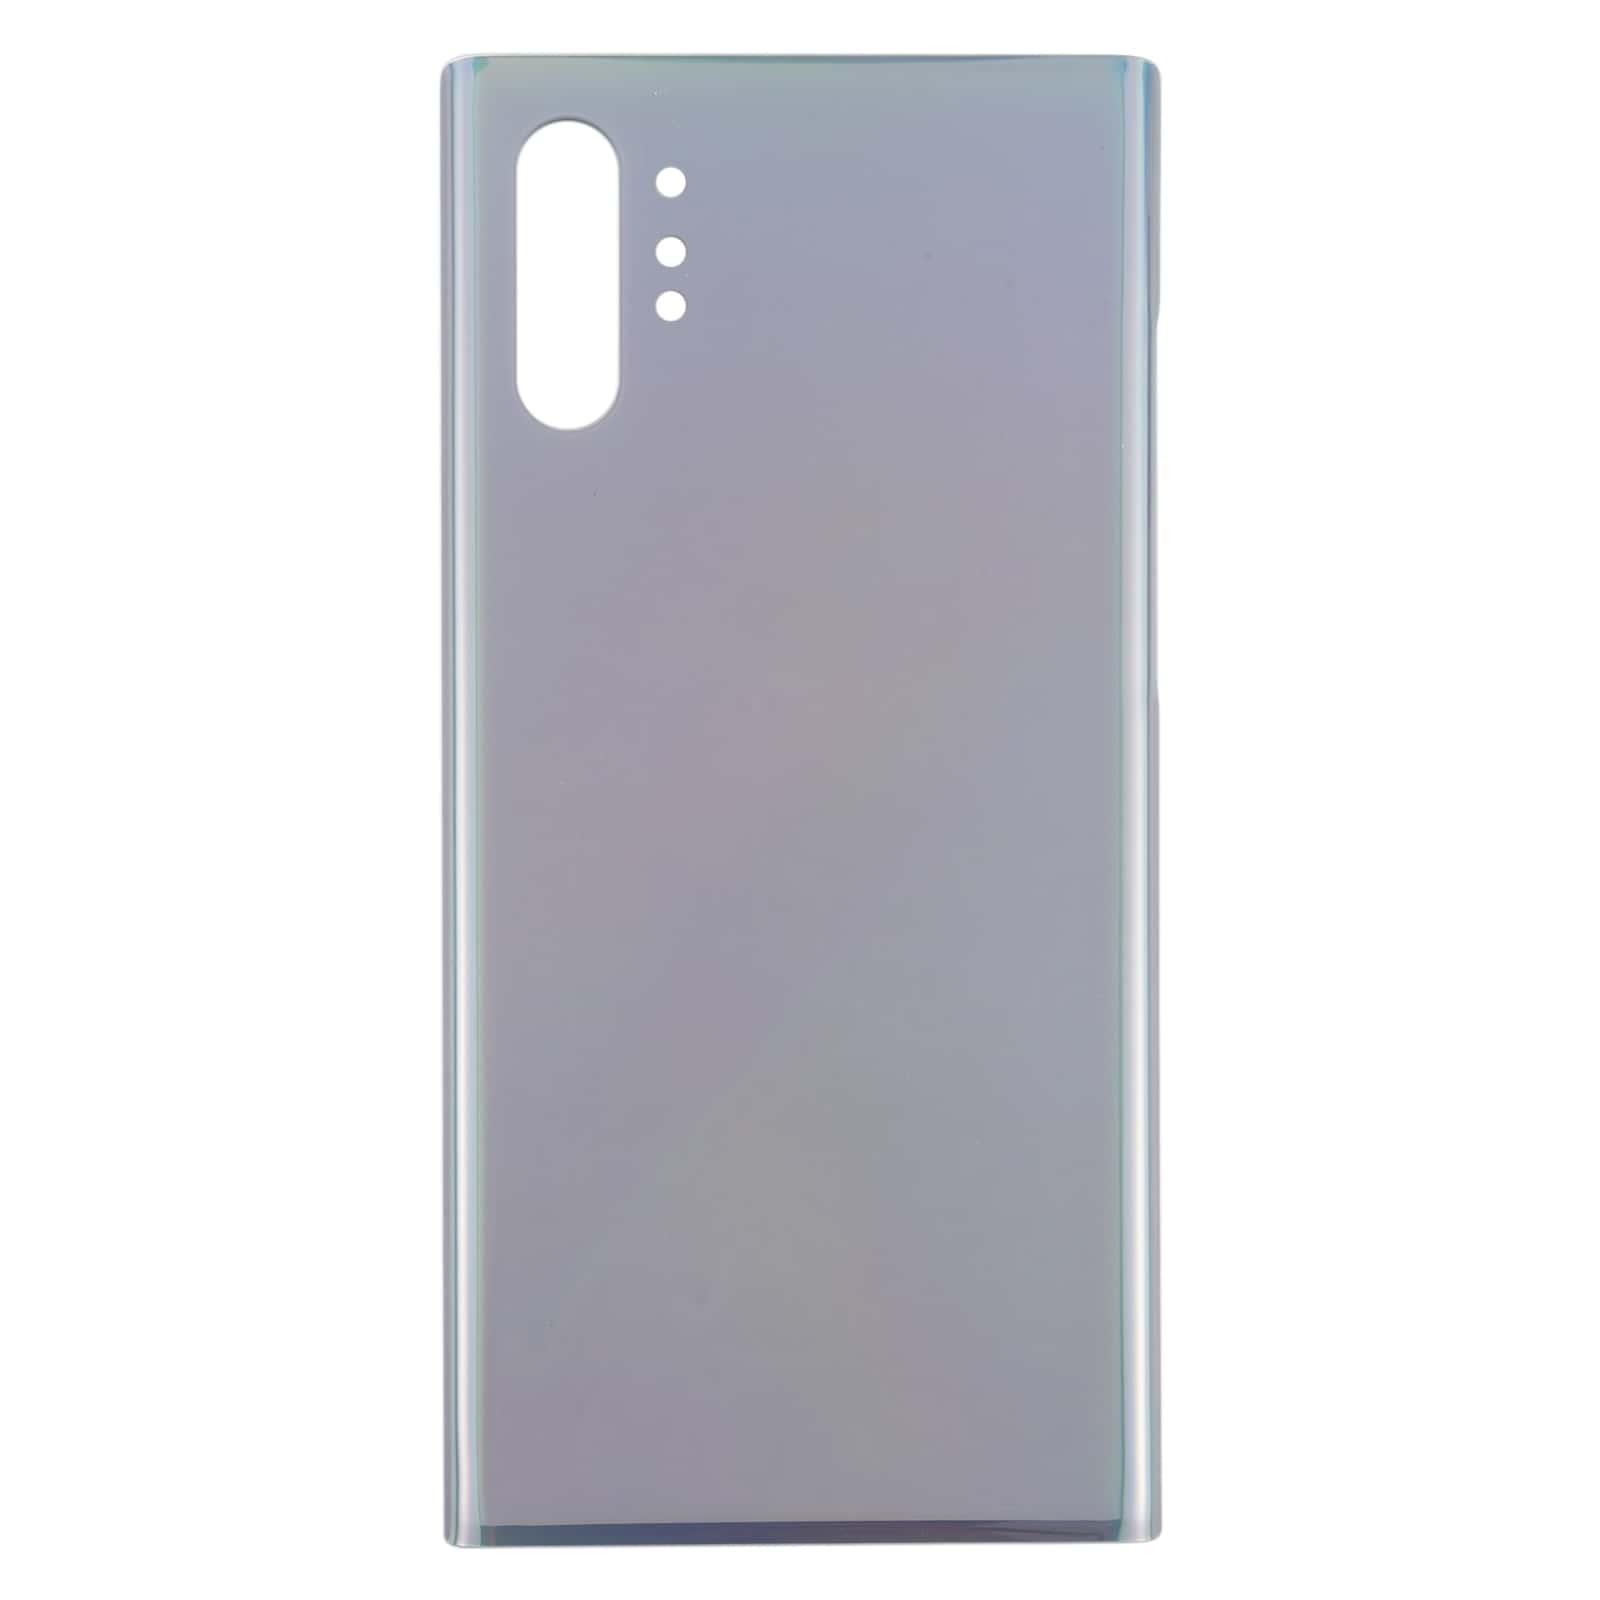 Back Glass Panel for  Samsung Galaxy Note10 Plus Silver